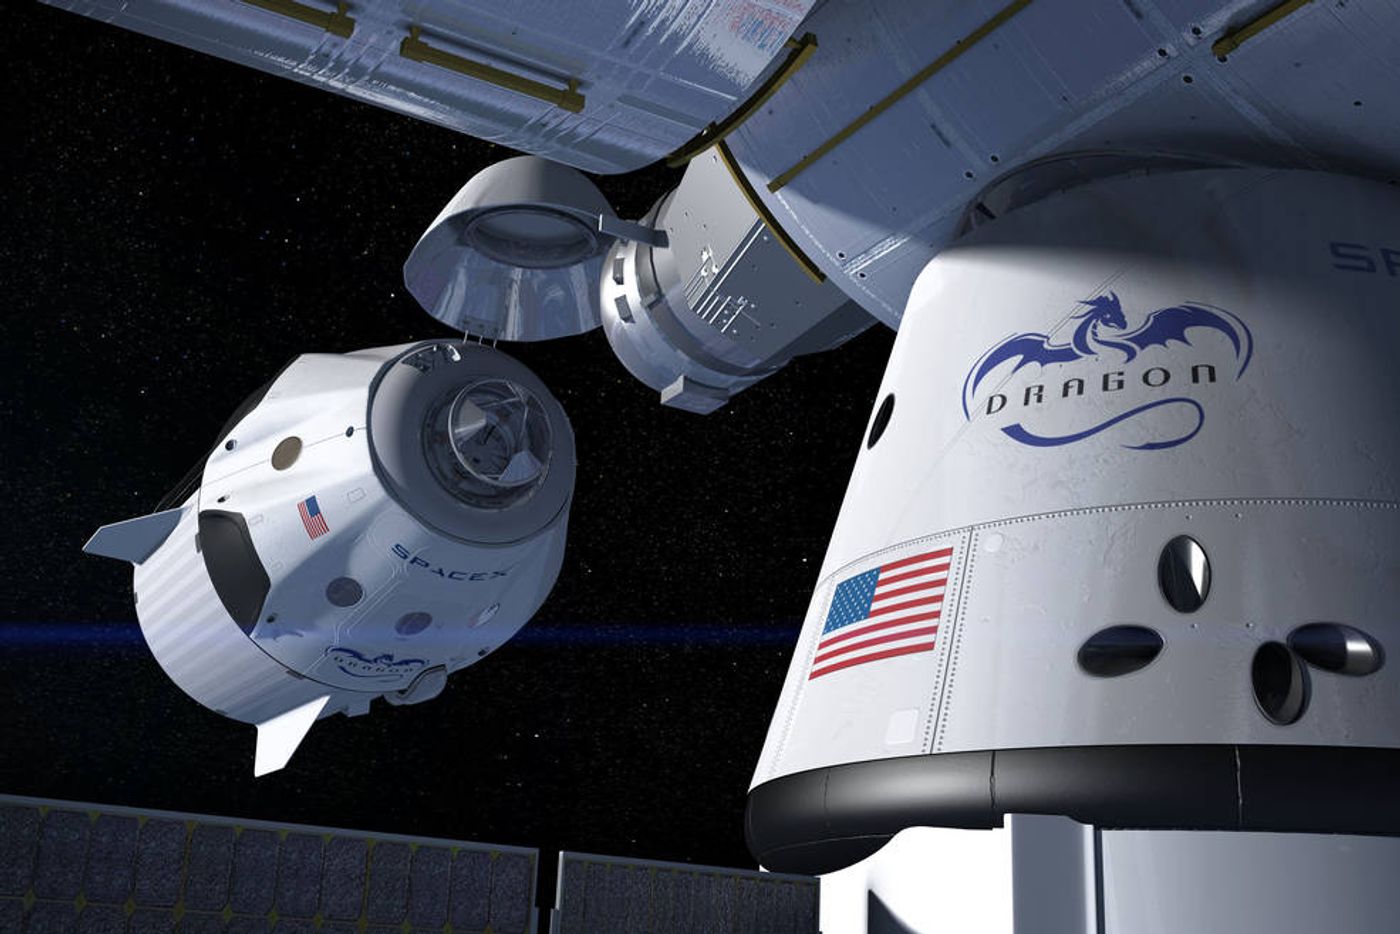 An artist's impression of SpaceX's Crew Dragon spacecraft docking with the International Space Station.